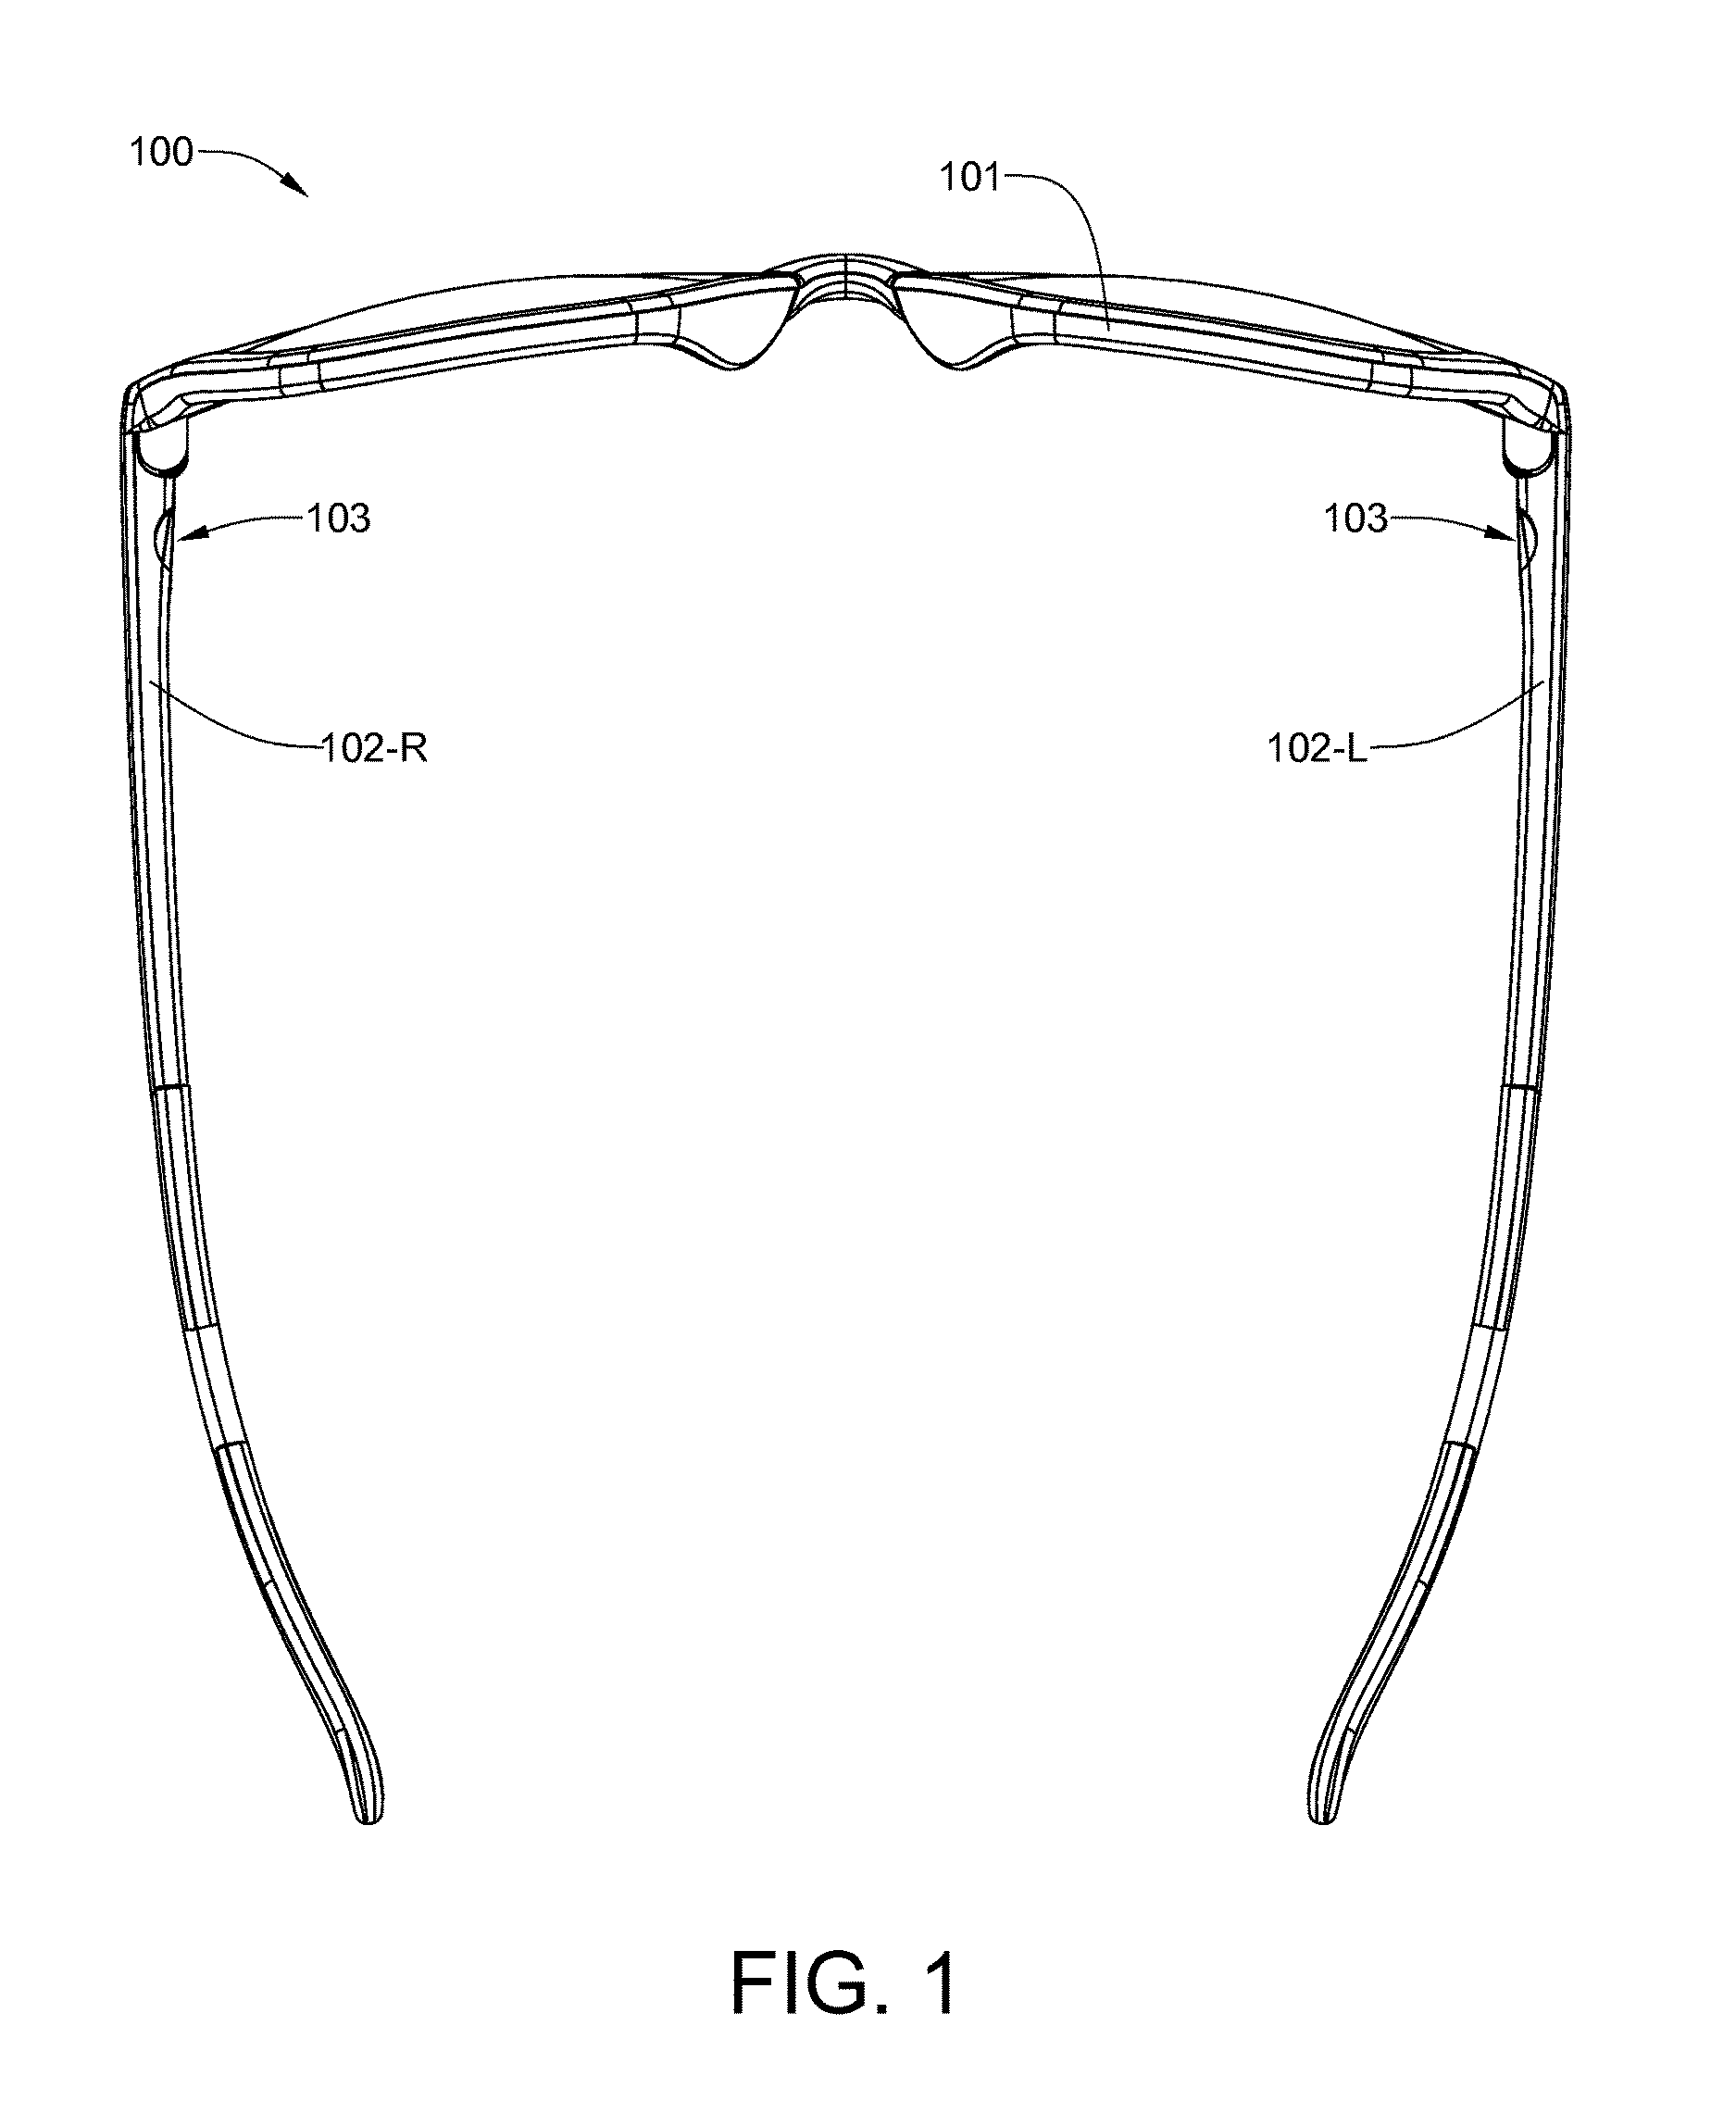 Eyeglass frame having selectively interchangeable temples with simplified recessed interconnection clips